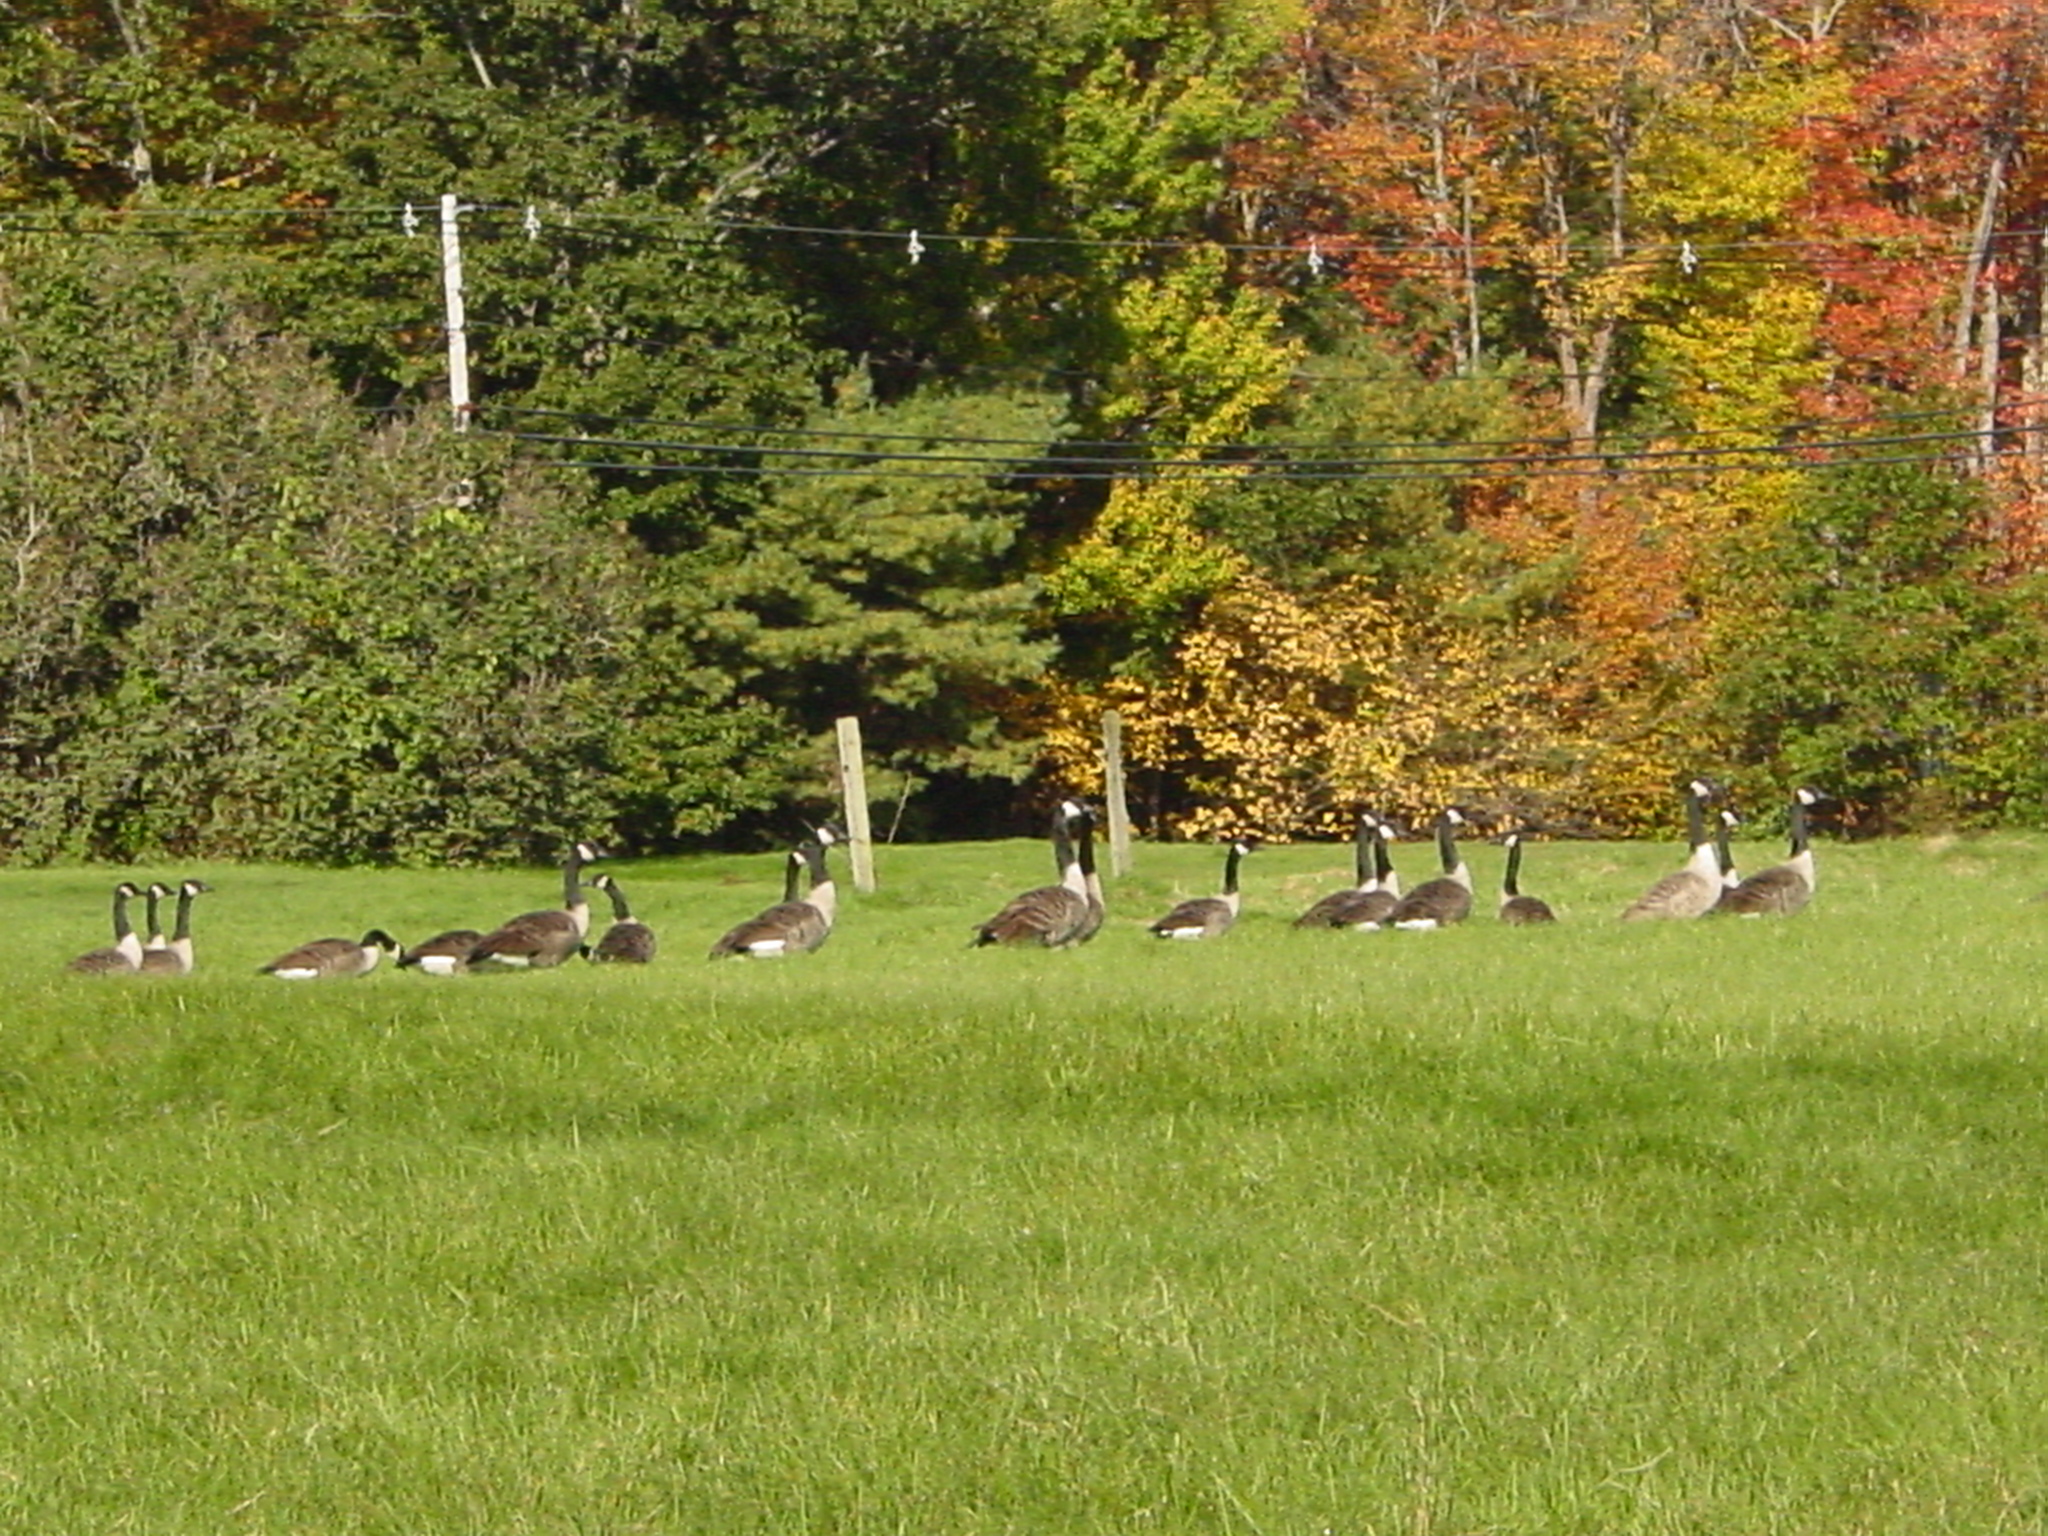 Geese Getting Ready To Fly South (user submitted)